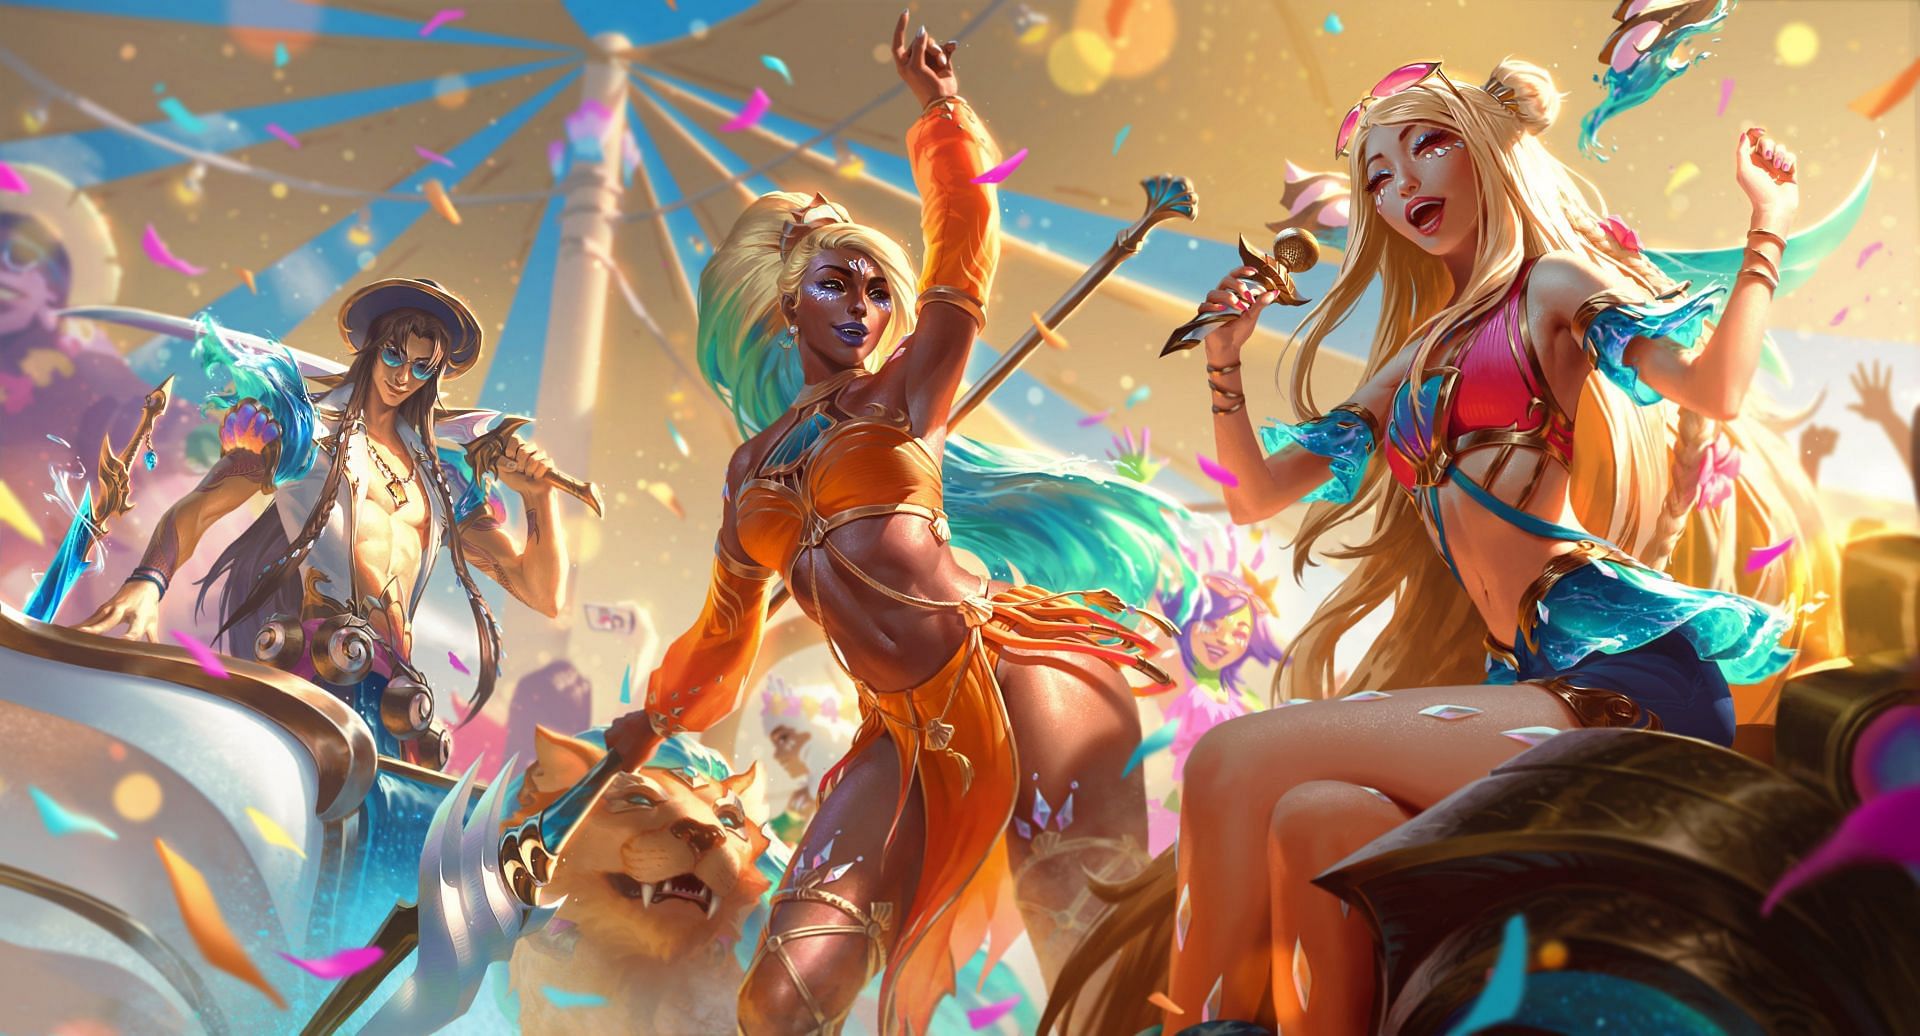 Ocean Song Yone (left), Nidalee (middle) and Seraphine (right) (Image via Riot Games)